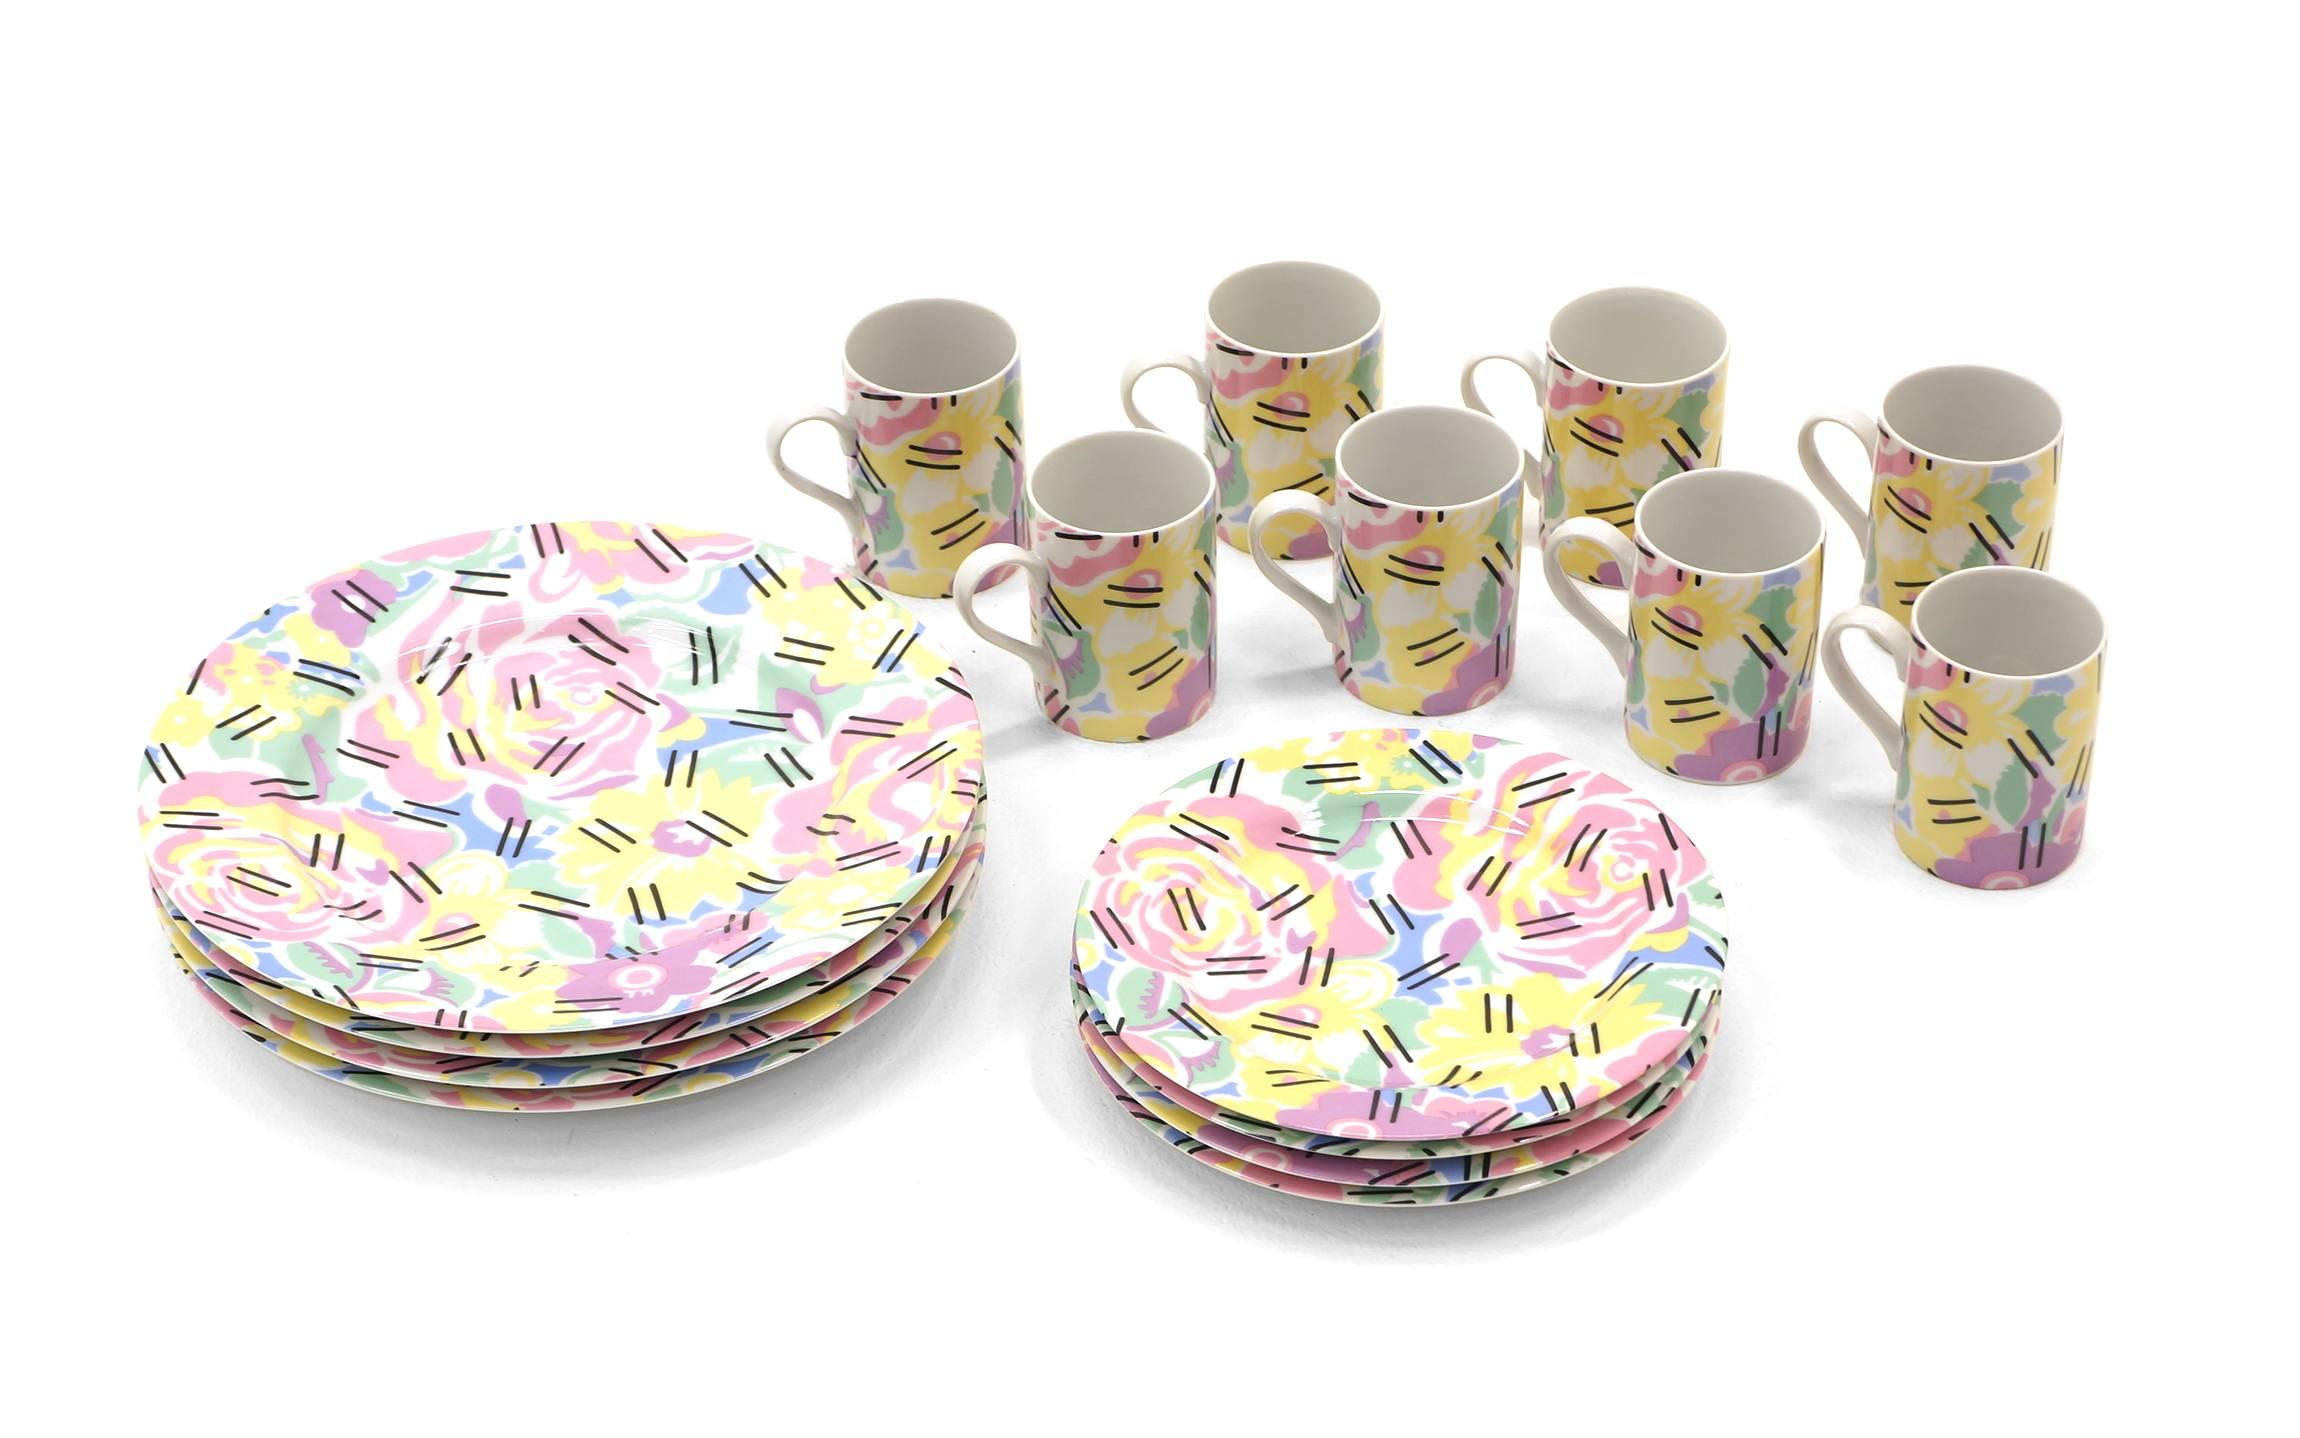 Grandmother tableware set by Robert Venturi and Denise Scott Brown for Swid Powell, 1984. Set of four plates, four saucers and 20 cups. 
Dinner plate: 12 in. diameter
Saucer: 9.13 in. diameter
Mug: 2.88 in. diameter, 3.88 in. height.